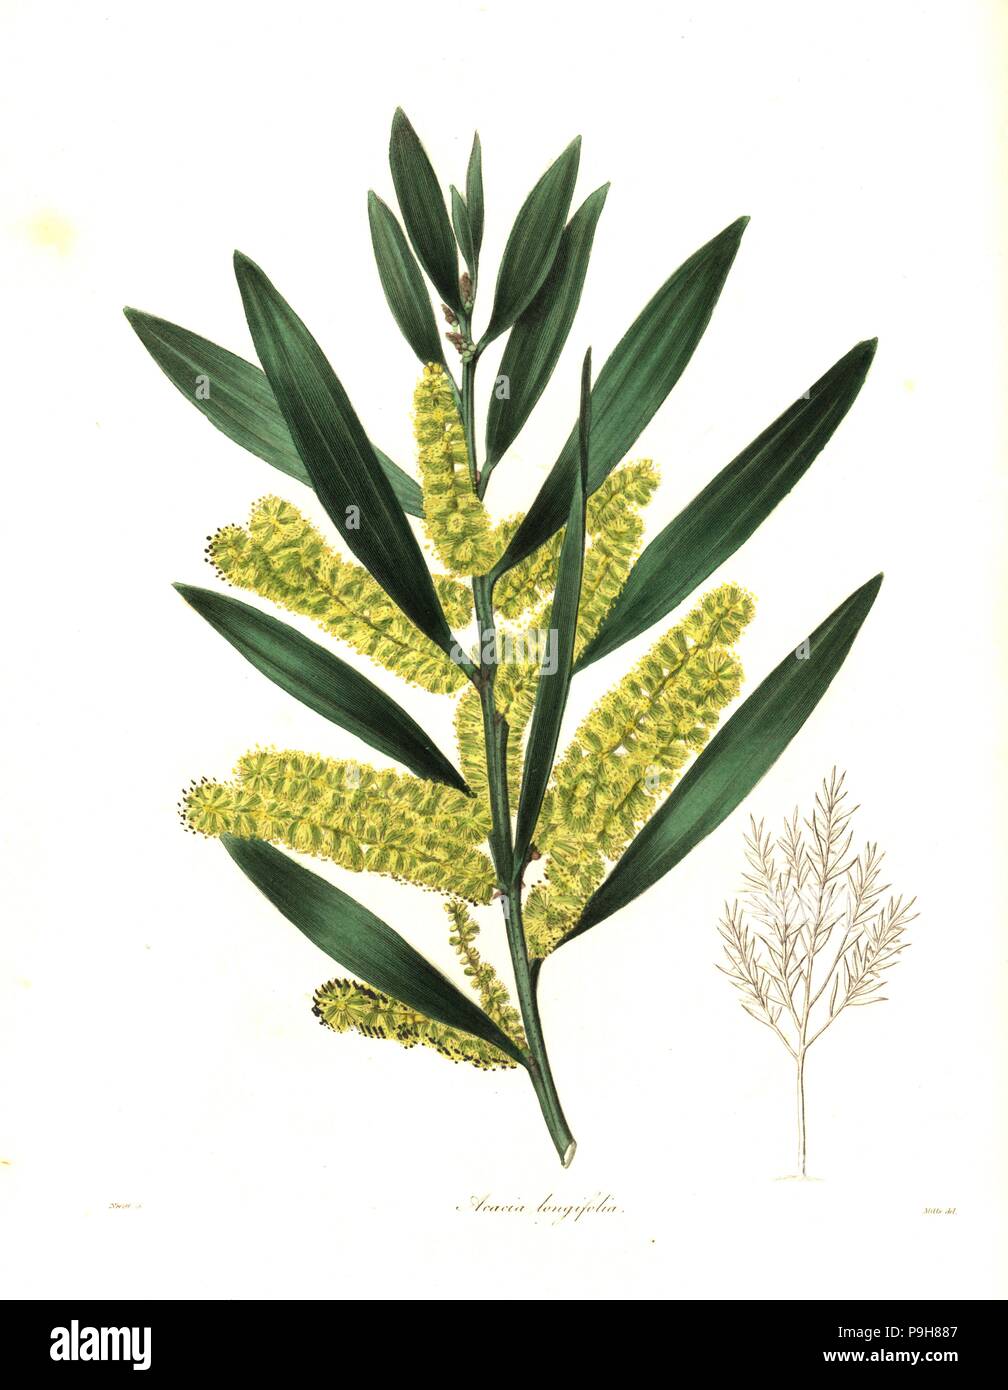 Long-leaved wattle or long-leaved acacia, Acacia longifolia. Handcoloured copperplate engraving by S. Nevitt after a botanical illustration by Mills from Benjamin Maund and the Rev. John Stevens Henslow's The Botanist, London, 1836. Stock Photo